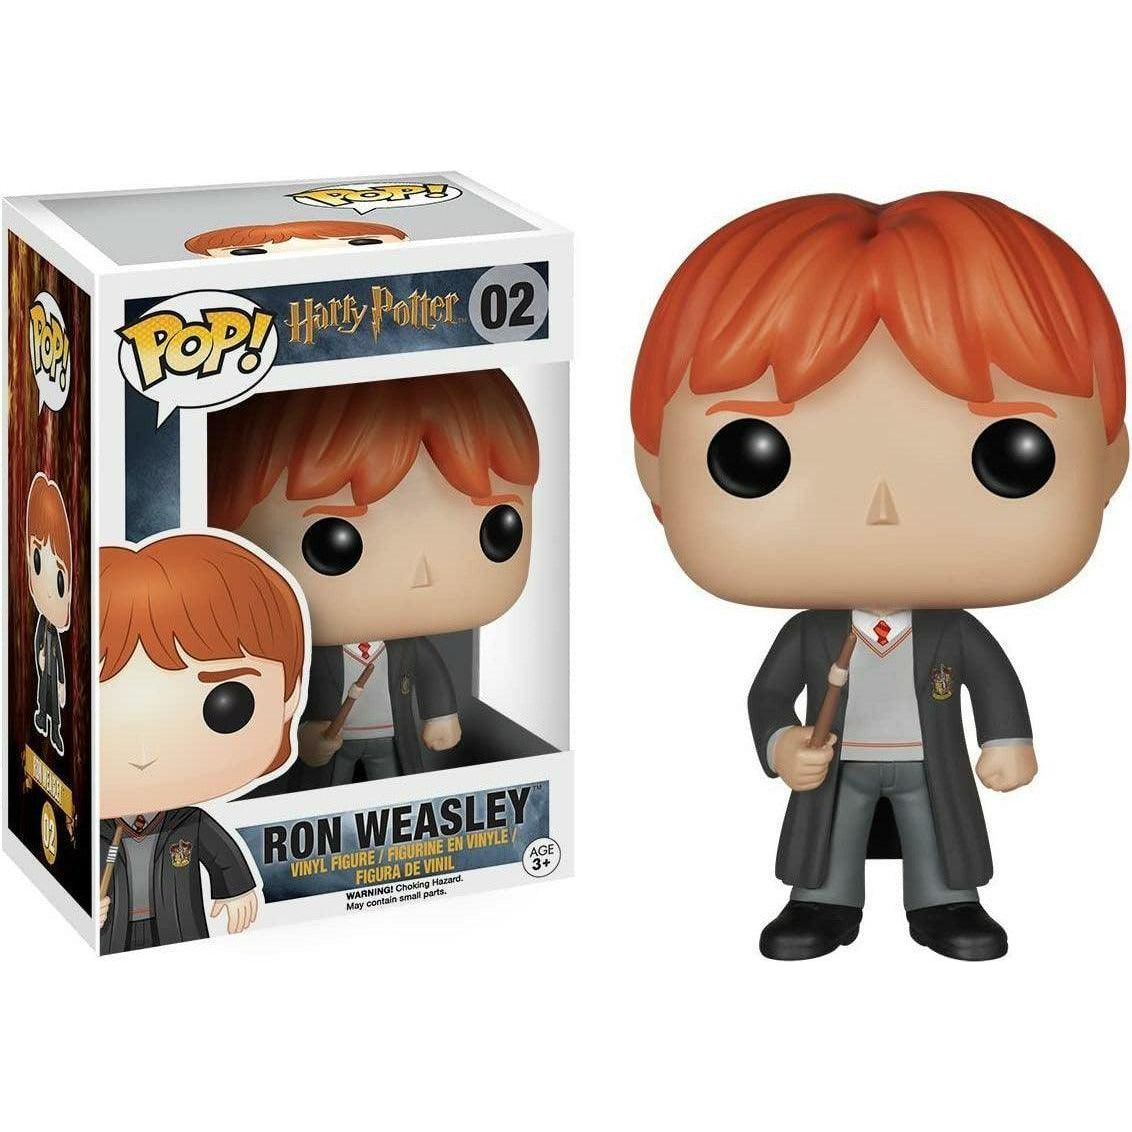 Funko POP Harry Potter - Harry Potter - Ron Weasley - BumbleToys - 18+, Boys, collectible, collectors, Funko, Harry Potter, Pre-Order